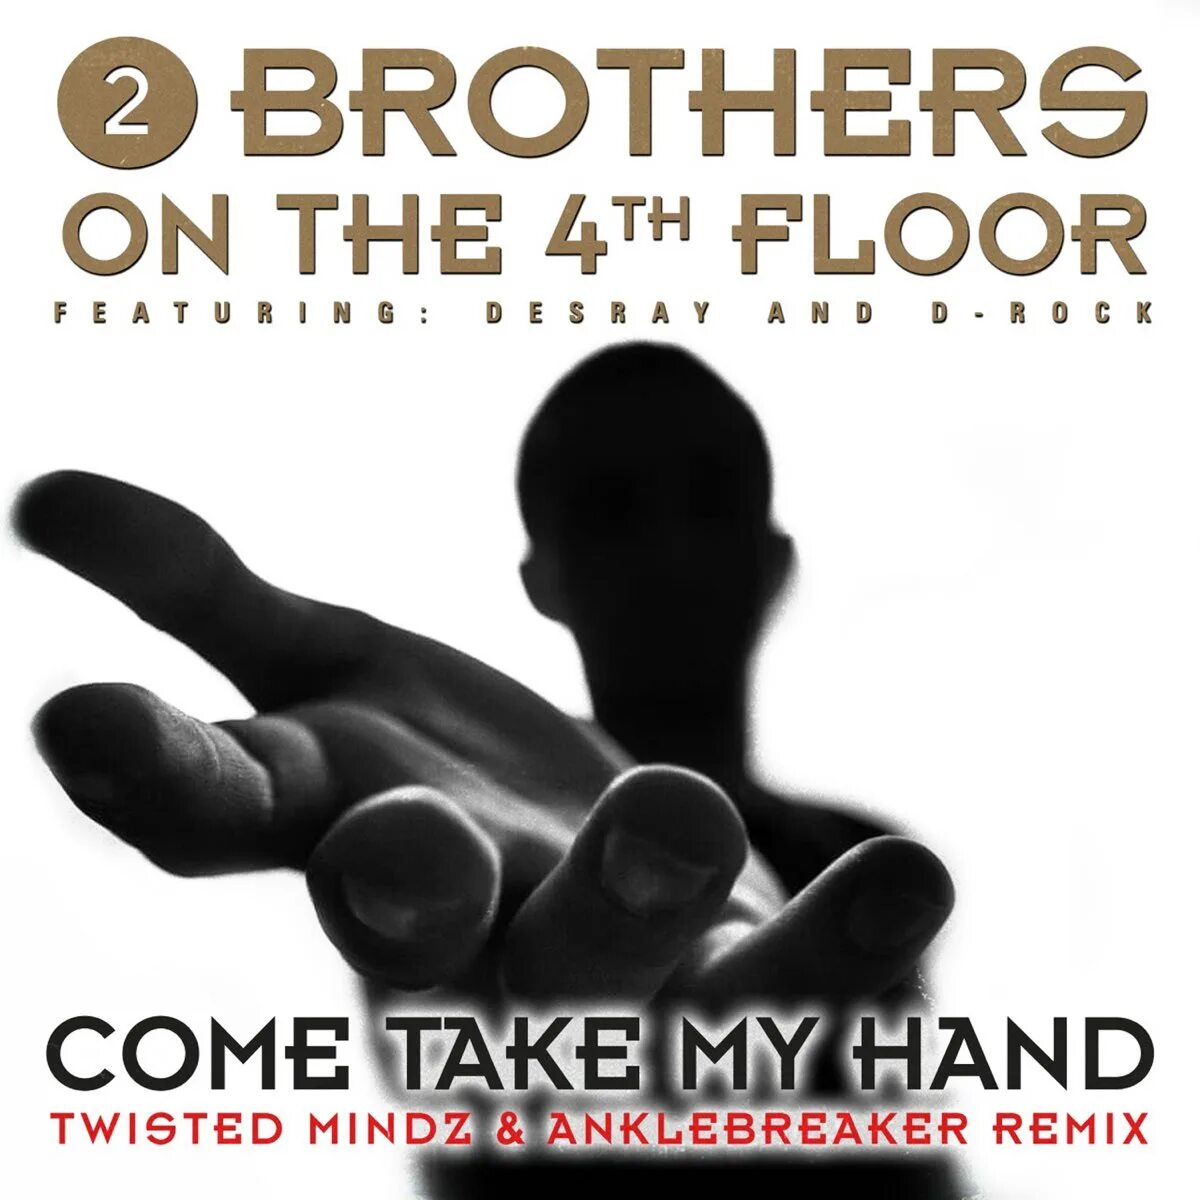 2 Brothers on the 4th Floor - come take my hand. 2 Brothers on the 4th Floor. Группа 2 brothers on the 4th Floor. Brothers on the 4th Floor - Fly. 2 brothers come take